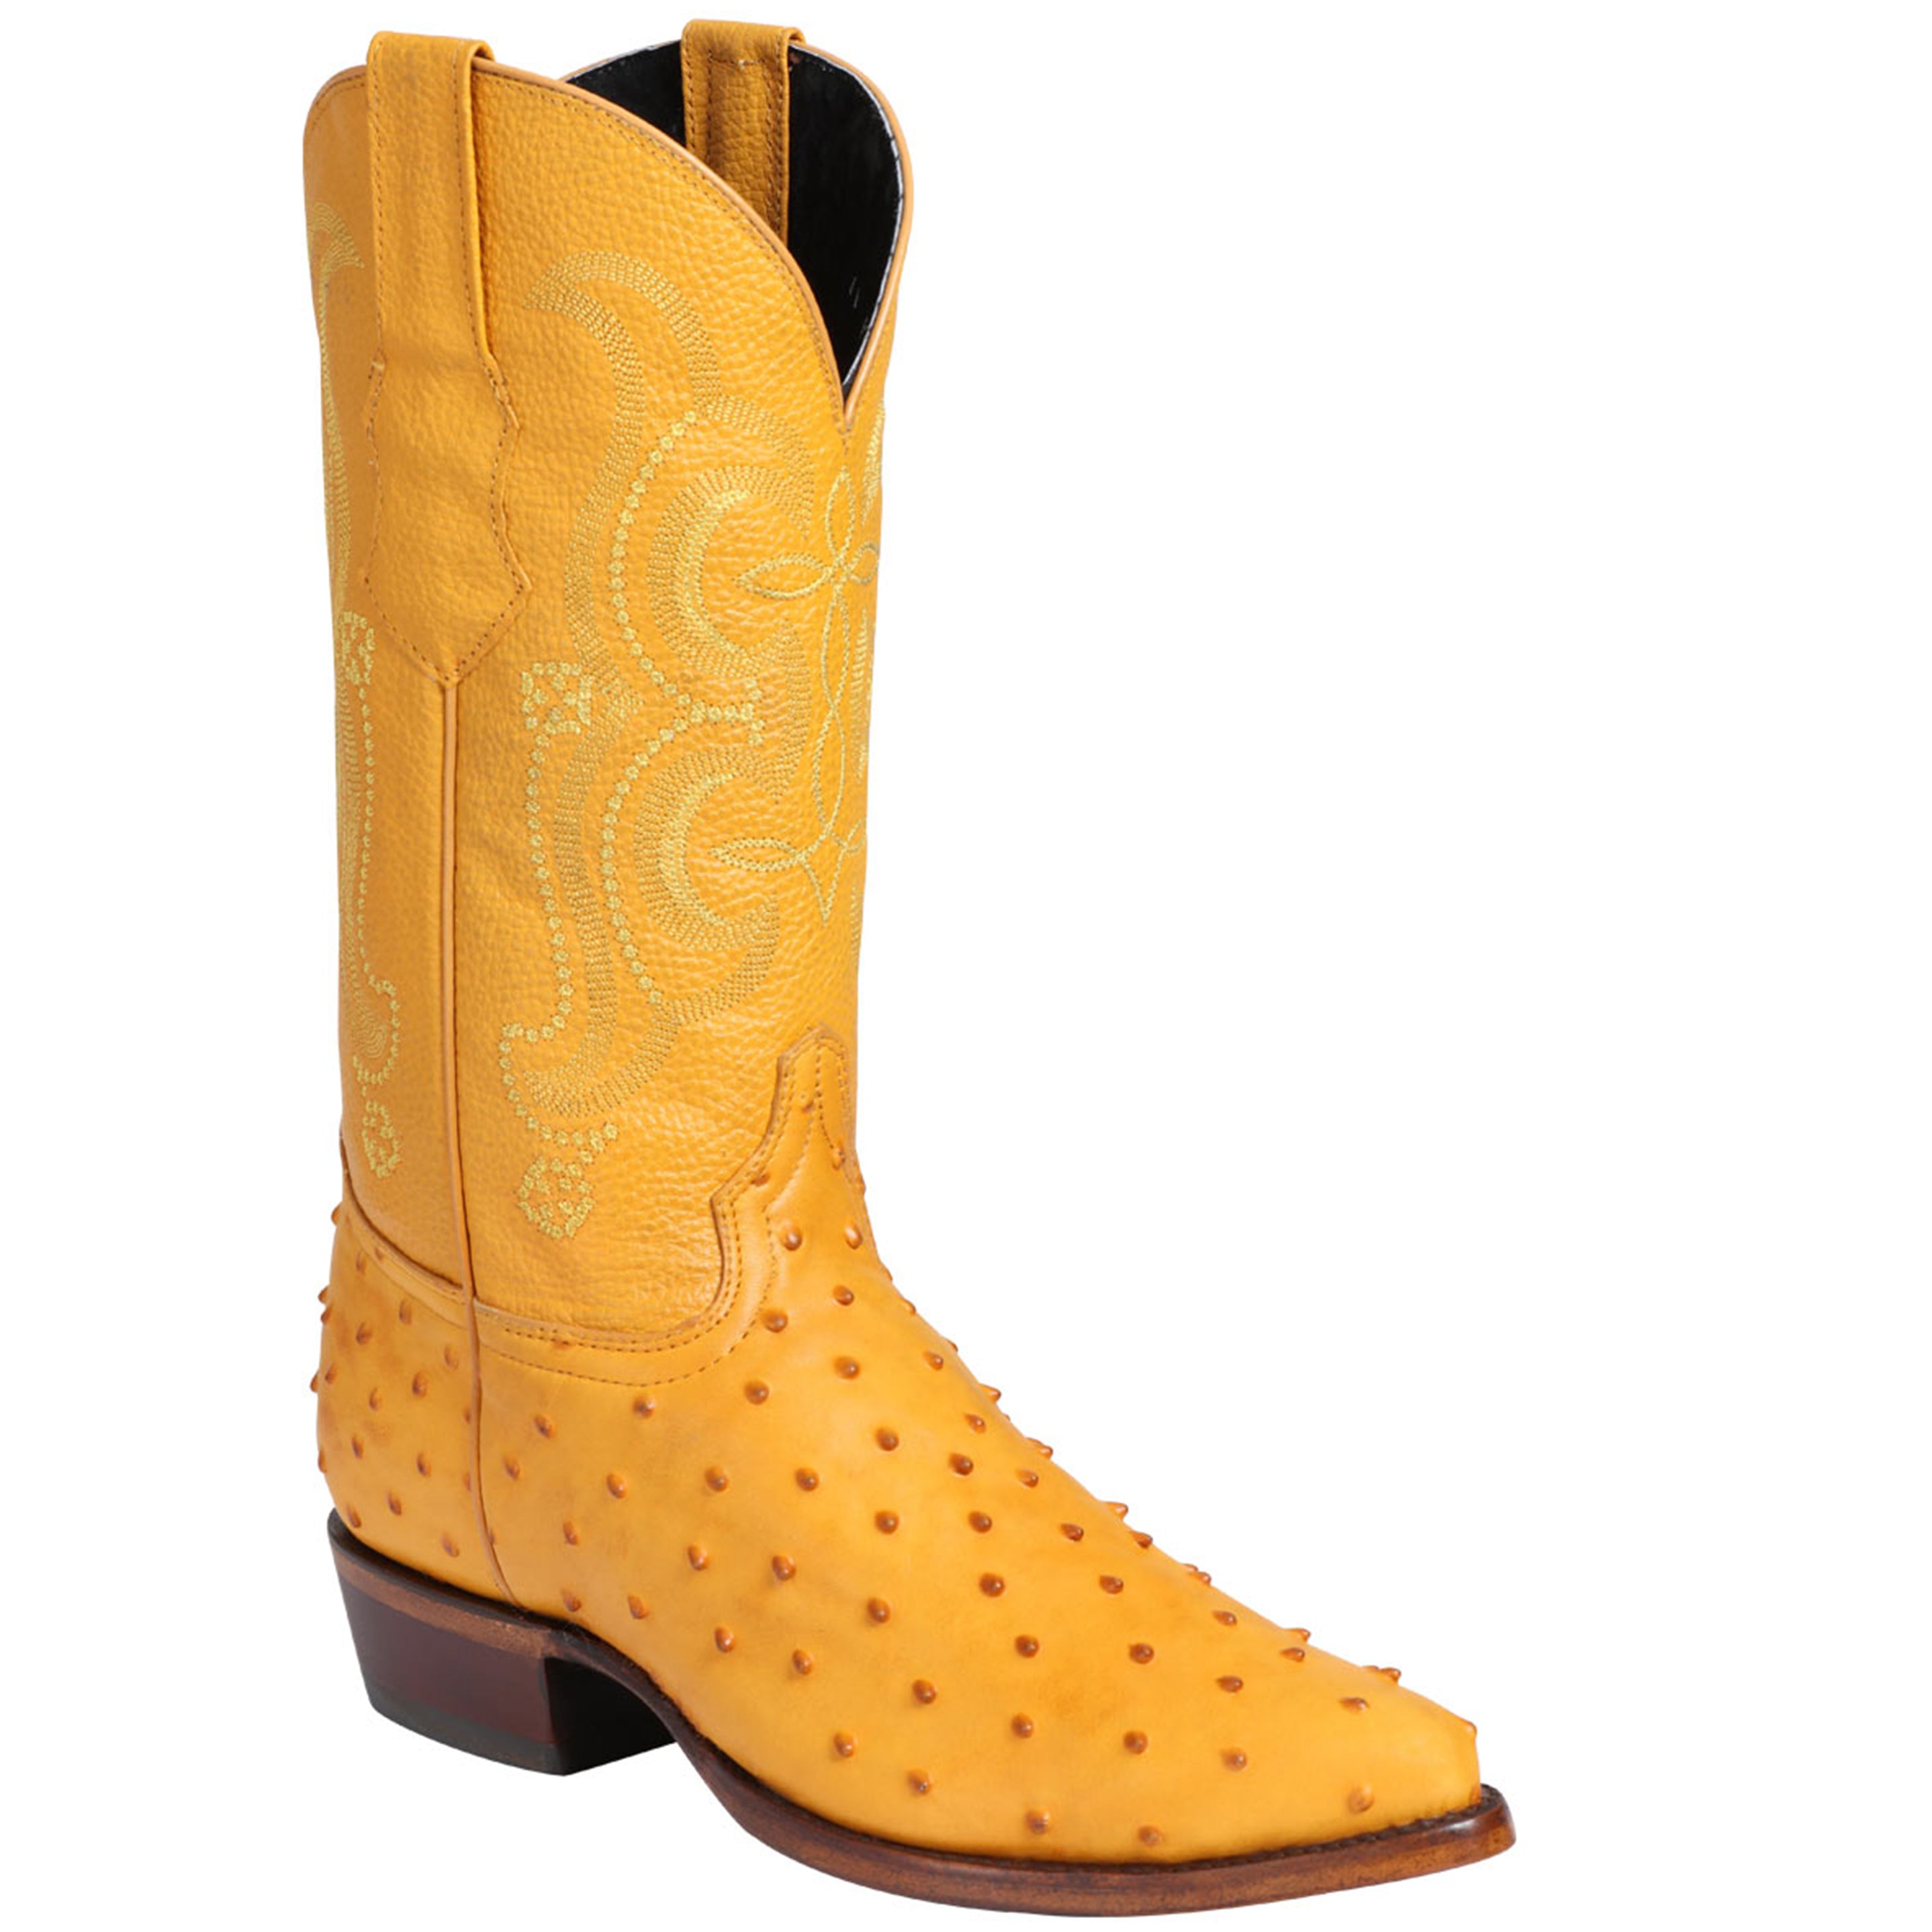 Buttercup Ostrich Print Boots Pointed Toe - El General